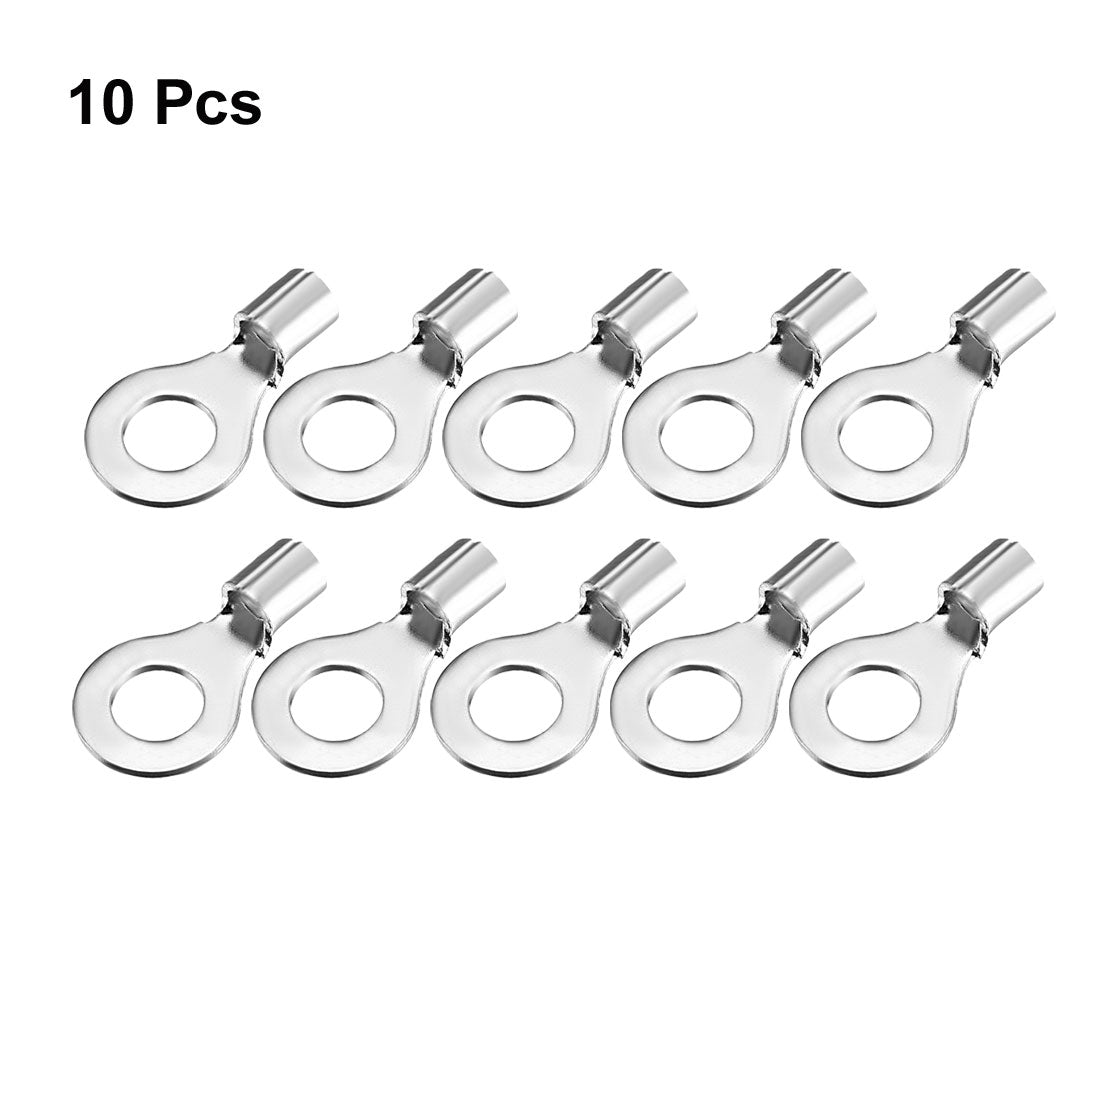 uxcell Uxcell 10Pcs RNB3.5-6 Non-Insulated U-Type Copper Crimp Terminals 2.5-4mm2 Wire Connector Silver Tone